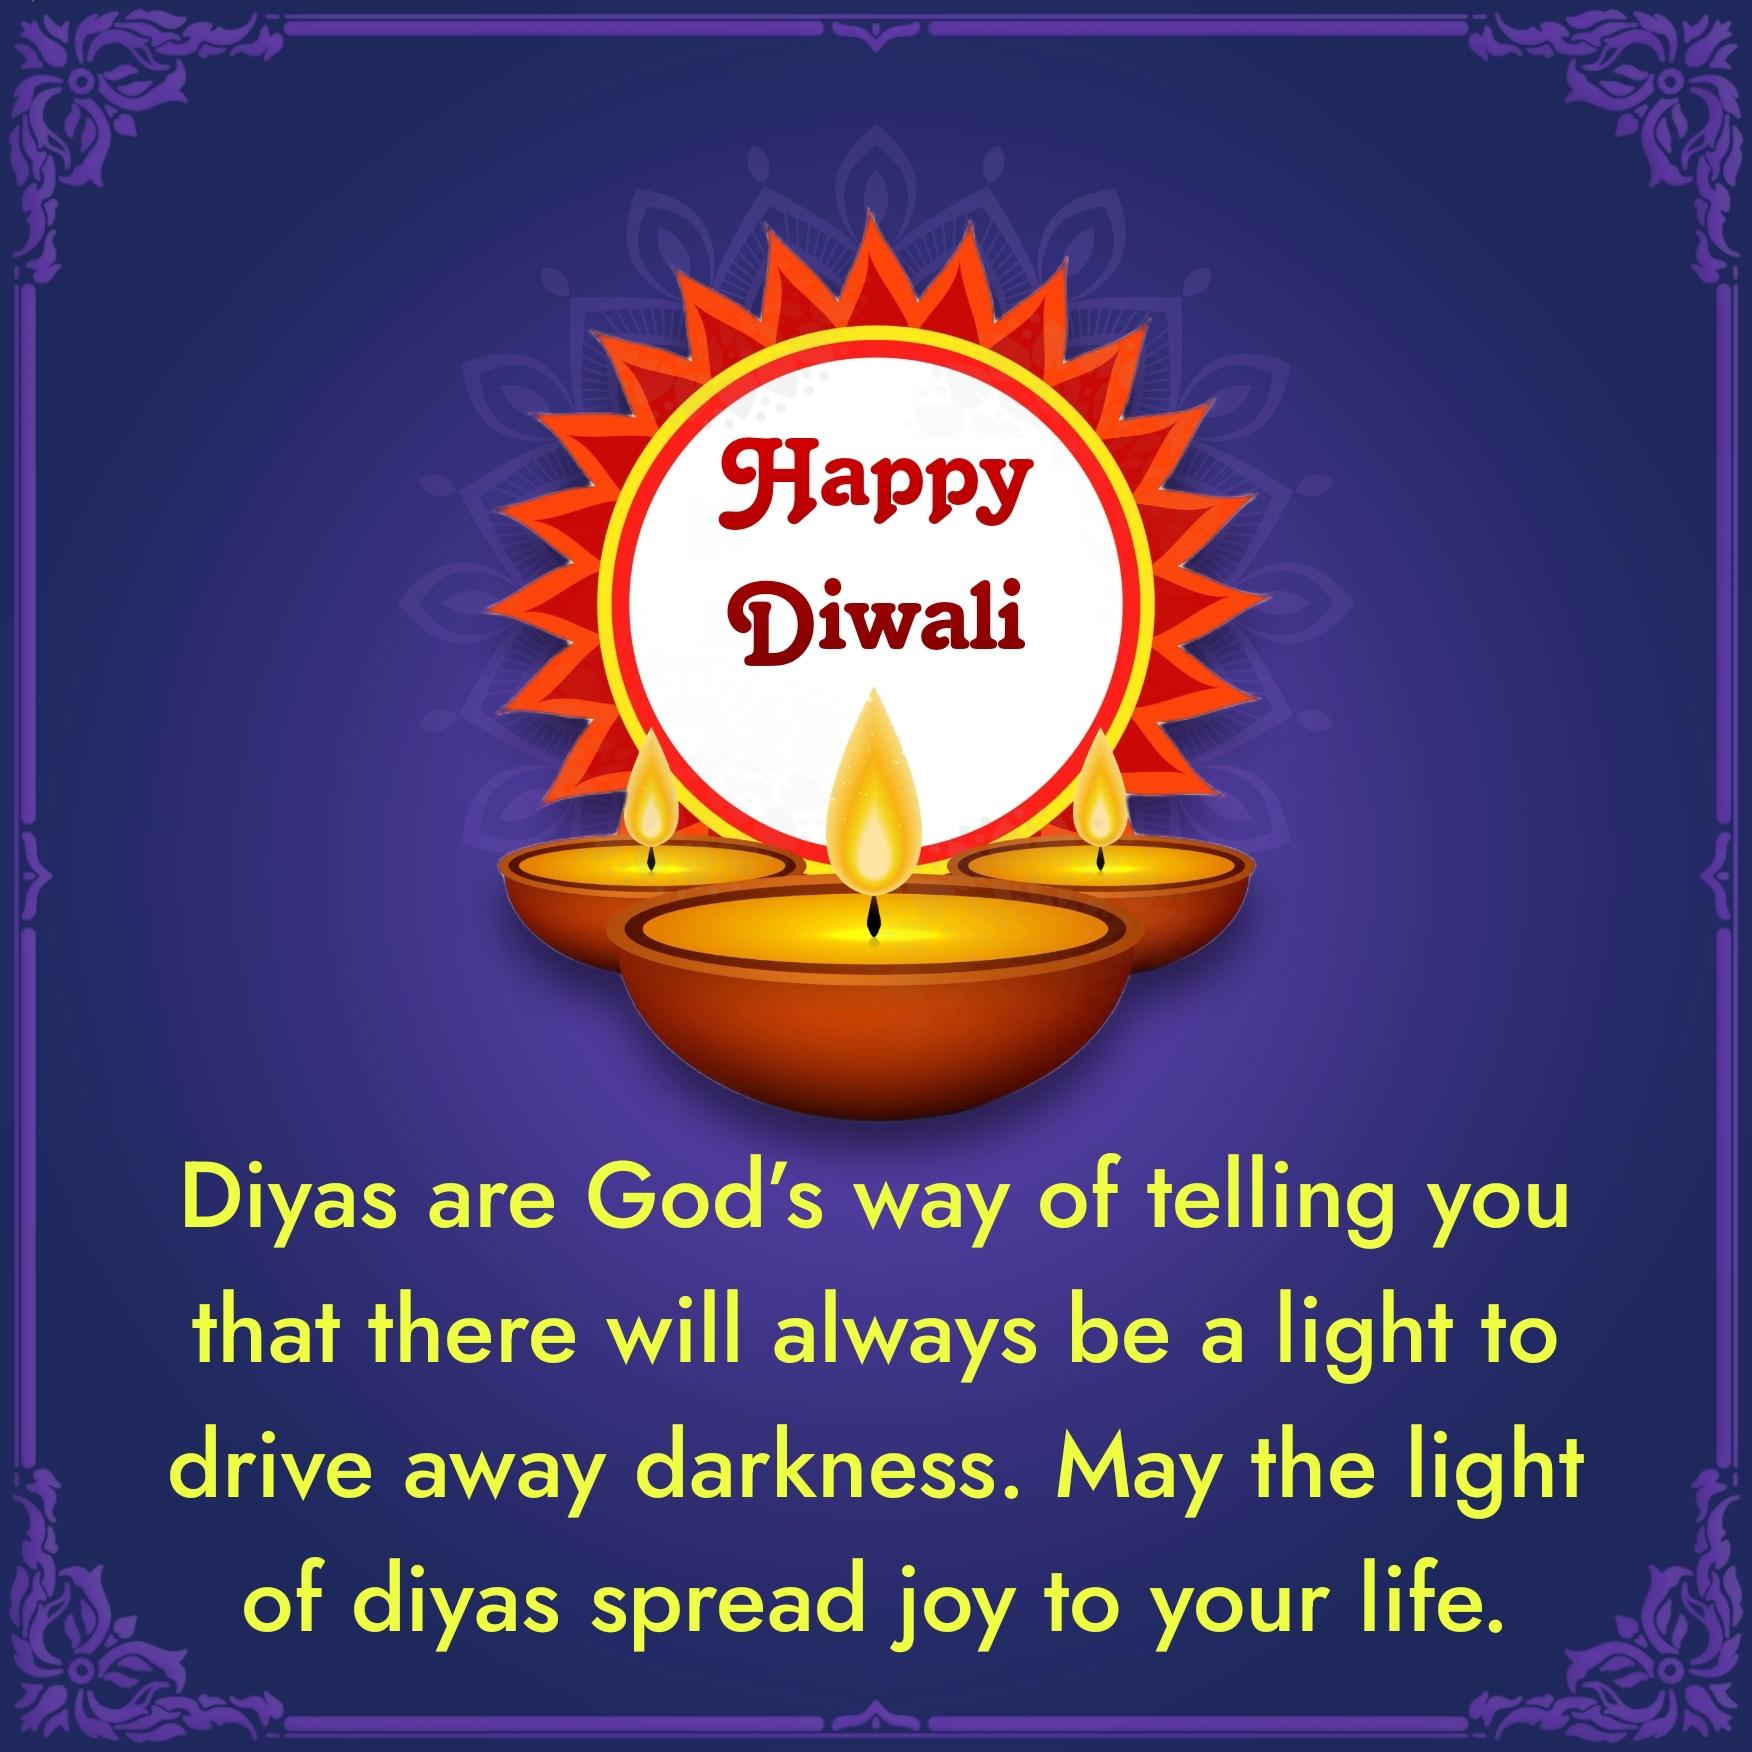 Diyas are Gods way of telling you that there will always be a light